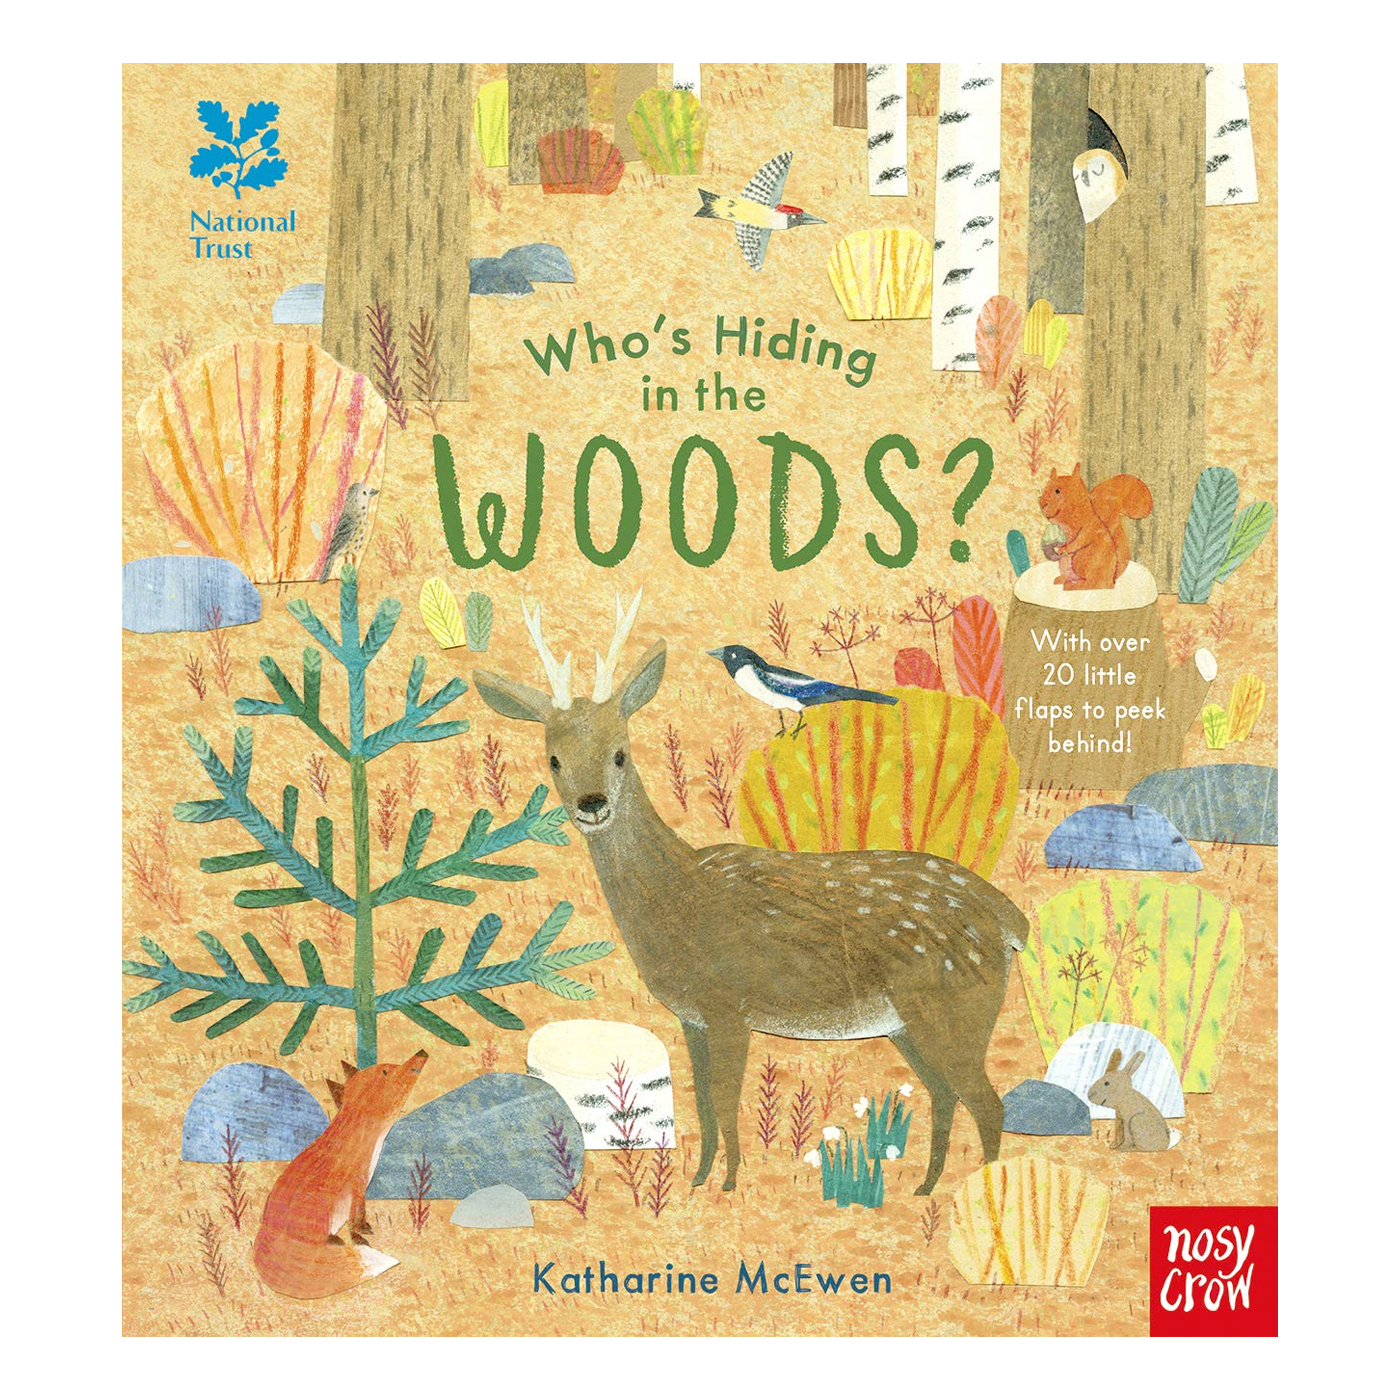 NOSY CROW National Trust: Who's Hiding in the Woods?